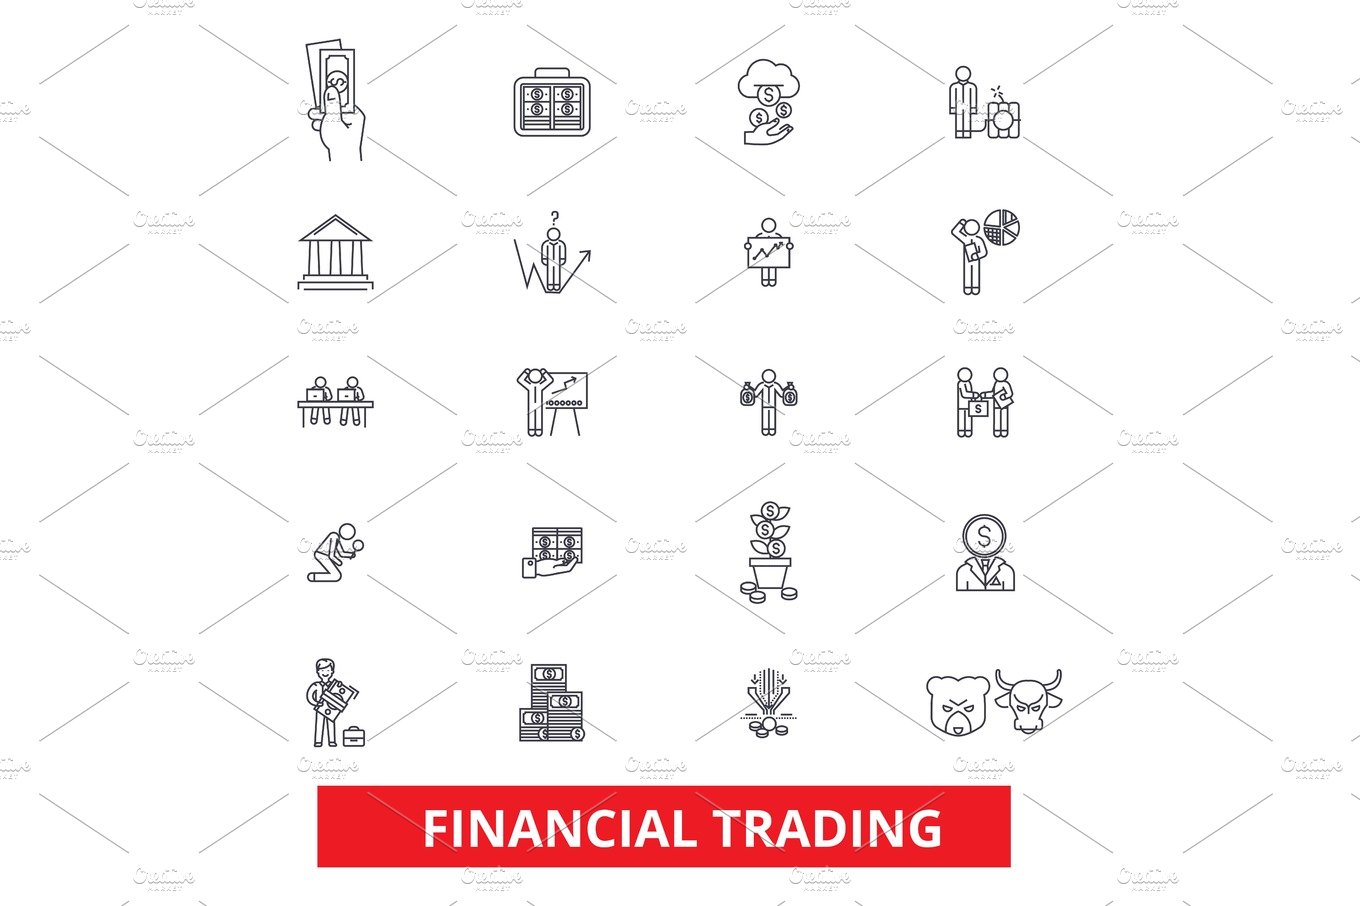 Financial trading, finance, banking, trade, stock exchange, market, money l... cover image.